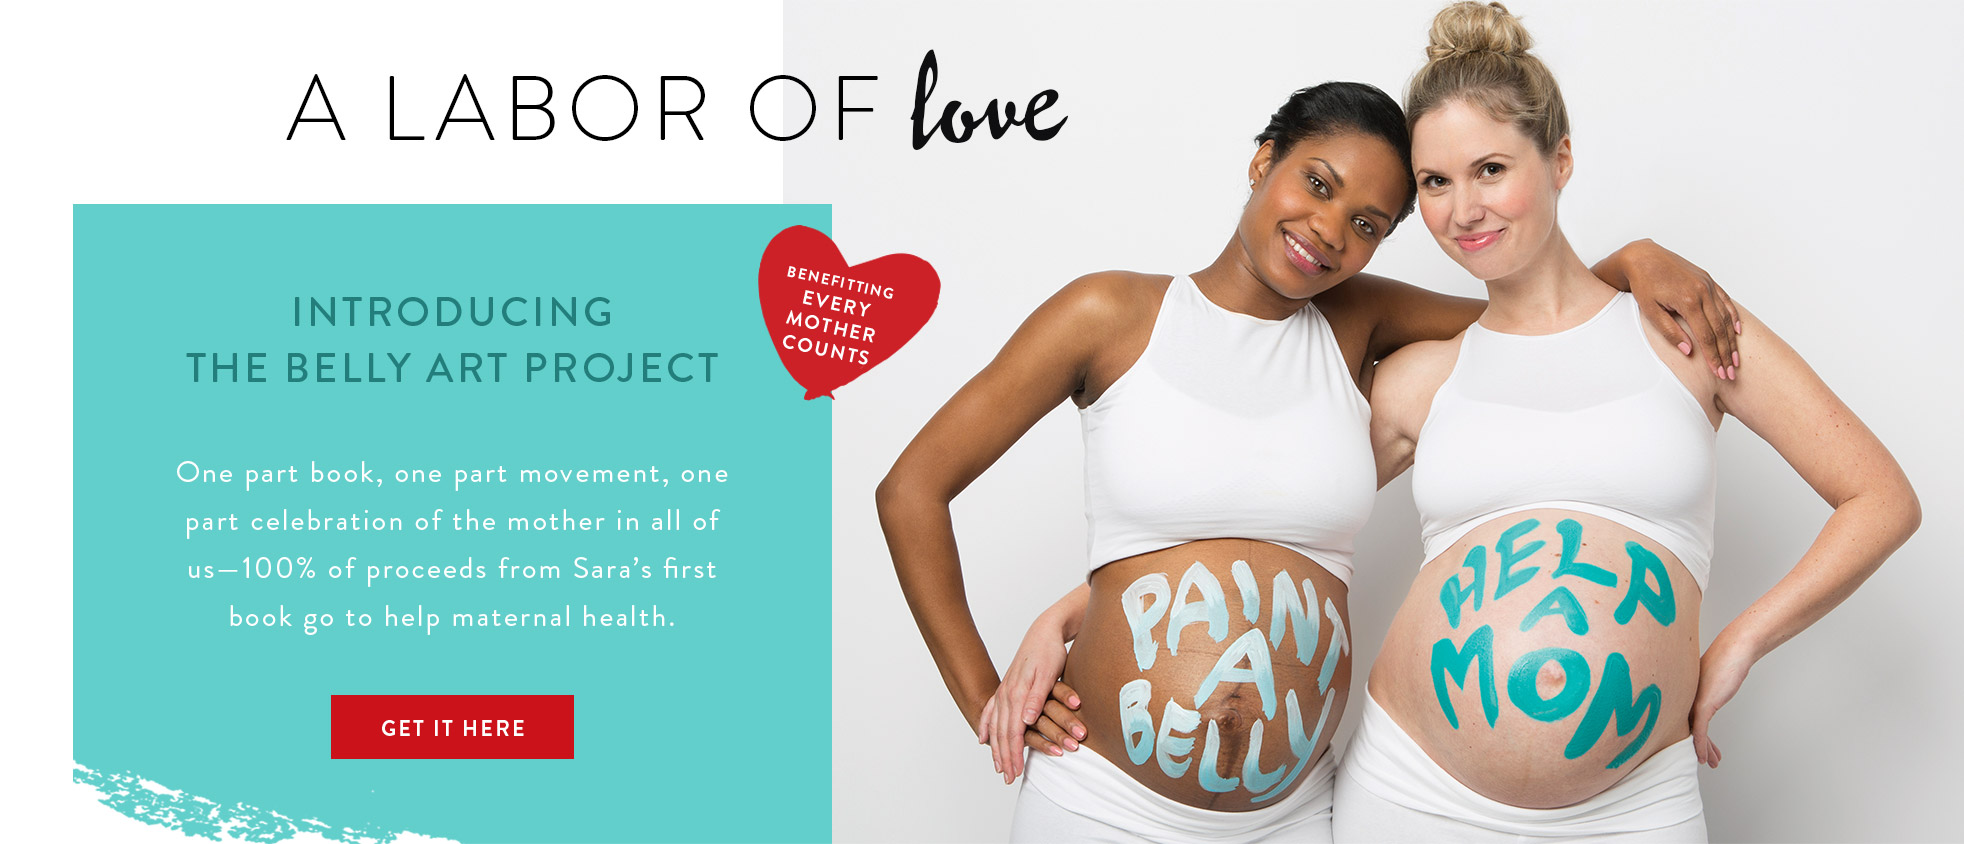 A labor of love. Introducing The Belly Art Project (benefitting Every Mother Counts). One part book, one part movement, one part celebration of the mother in all of us - 100% of proceeds from Sara's first book go to help maternal heath. GET IT HERE.